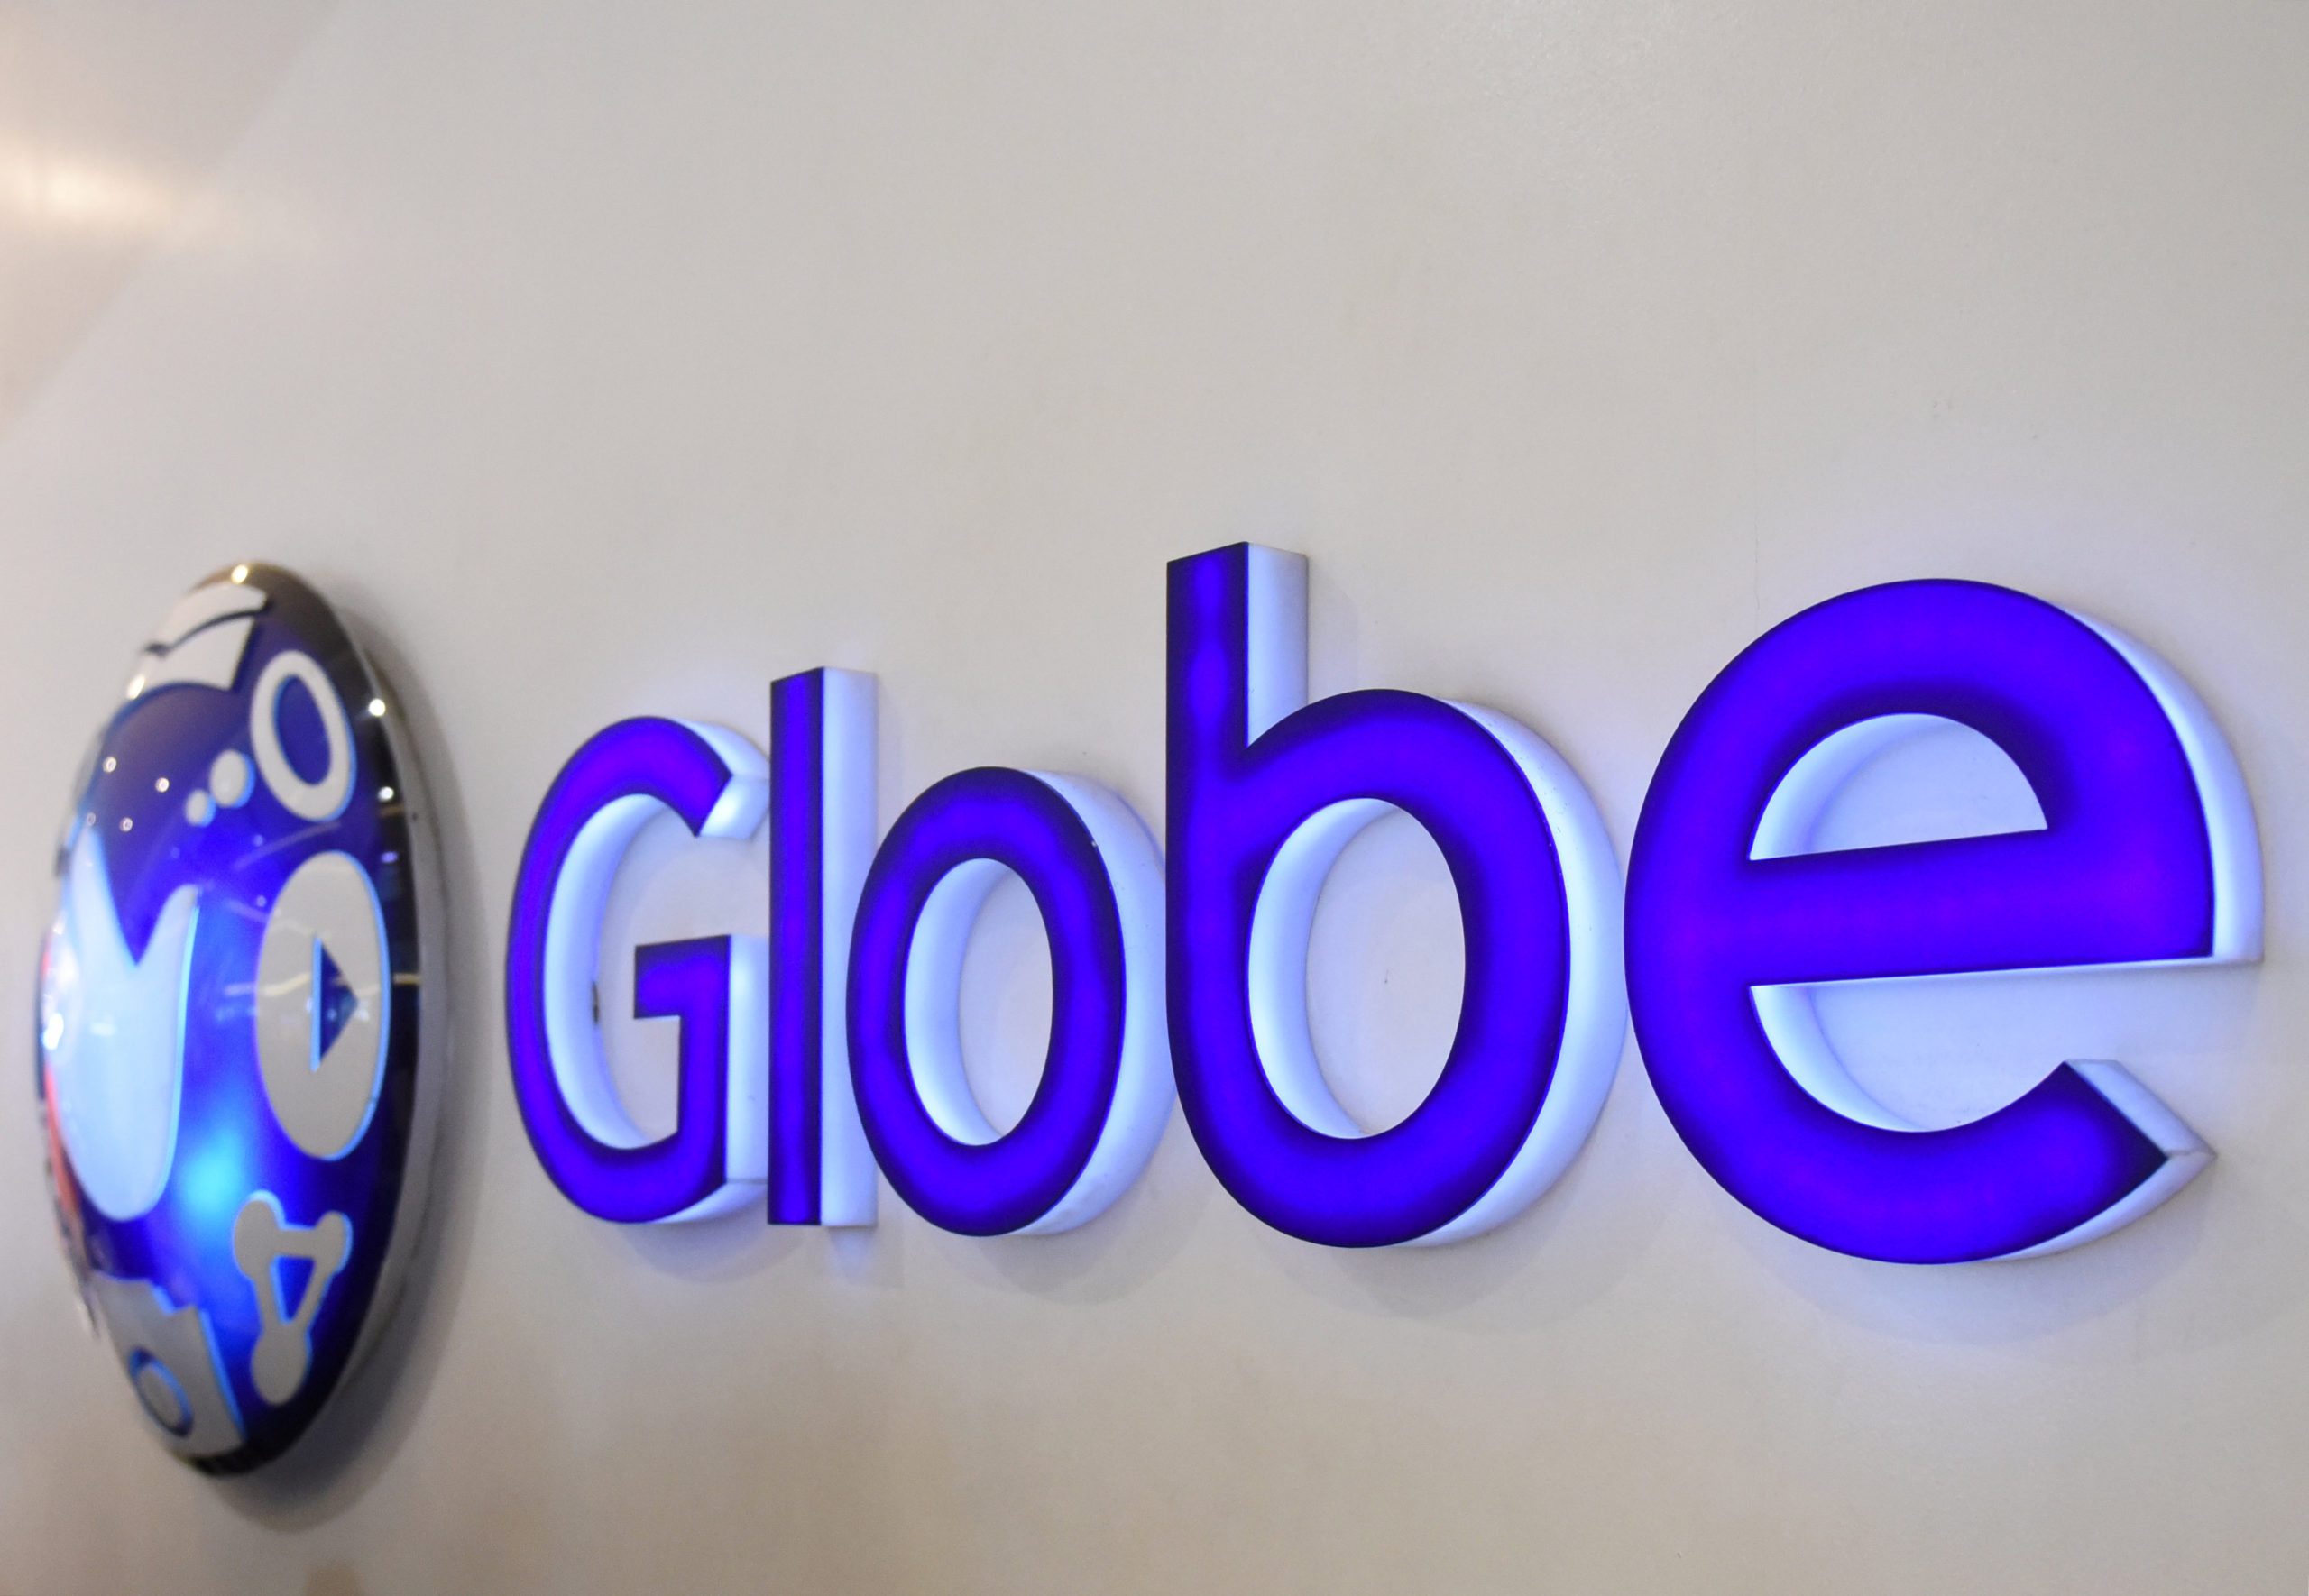 Philippines' Globe sells telecom towers for $340m